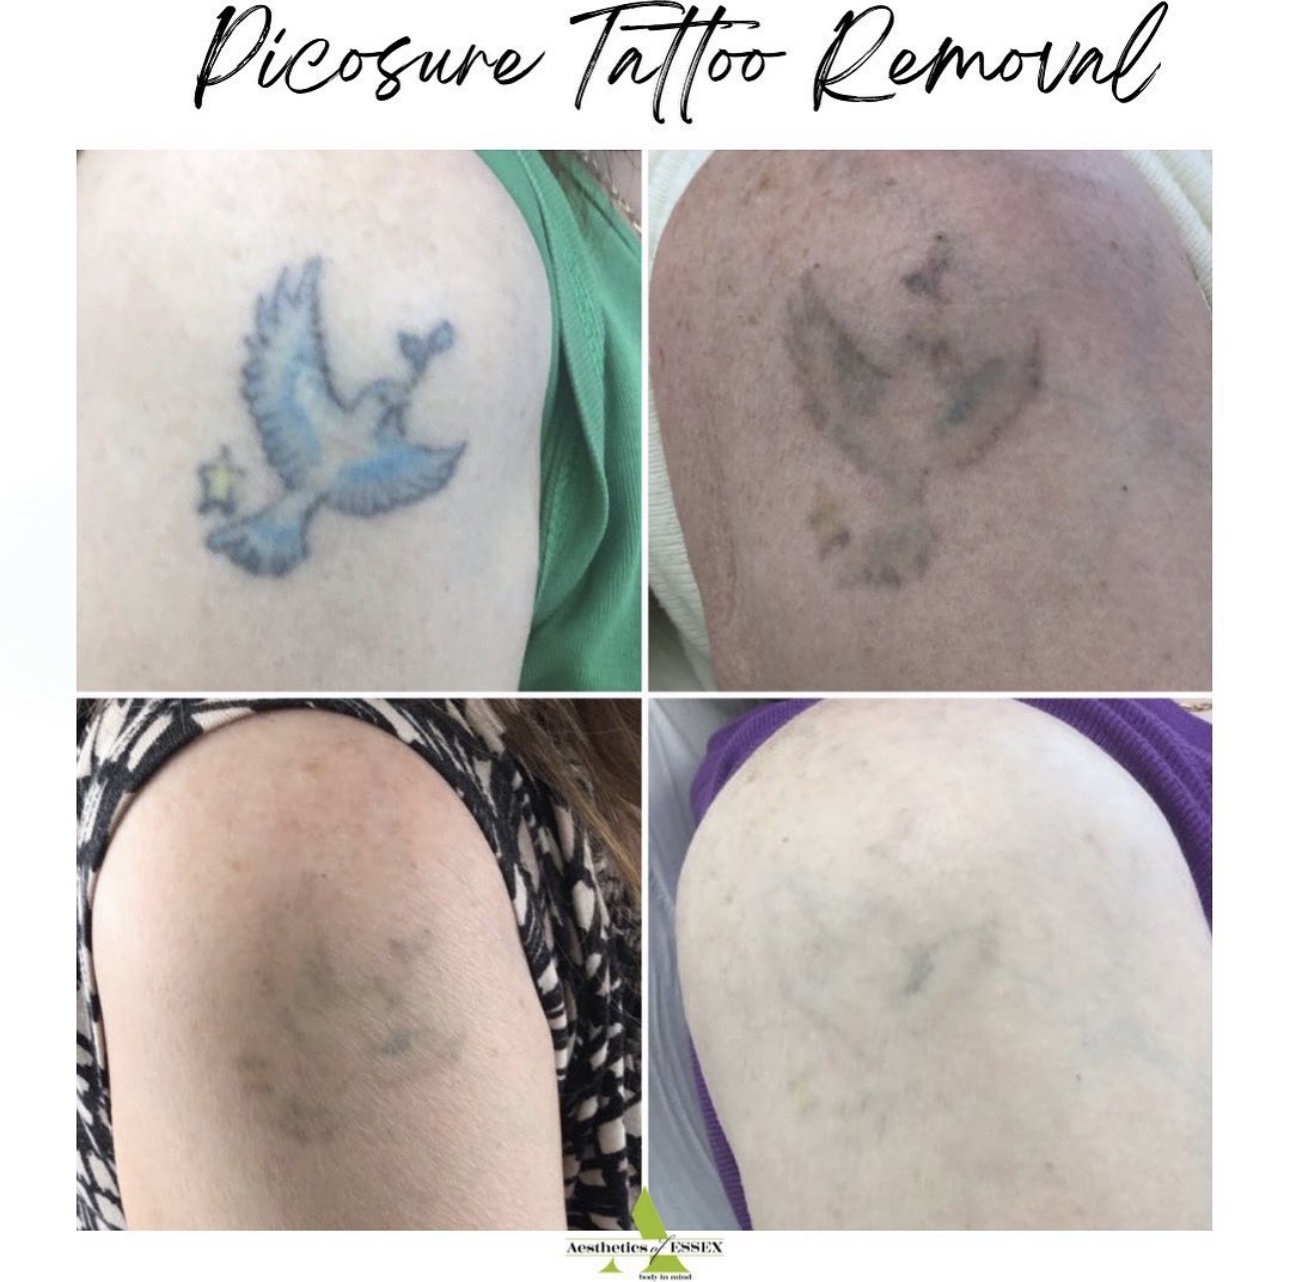 Laser Tattoo and PMU Removal in New York | Aesthetic Lounge NYC